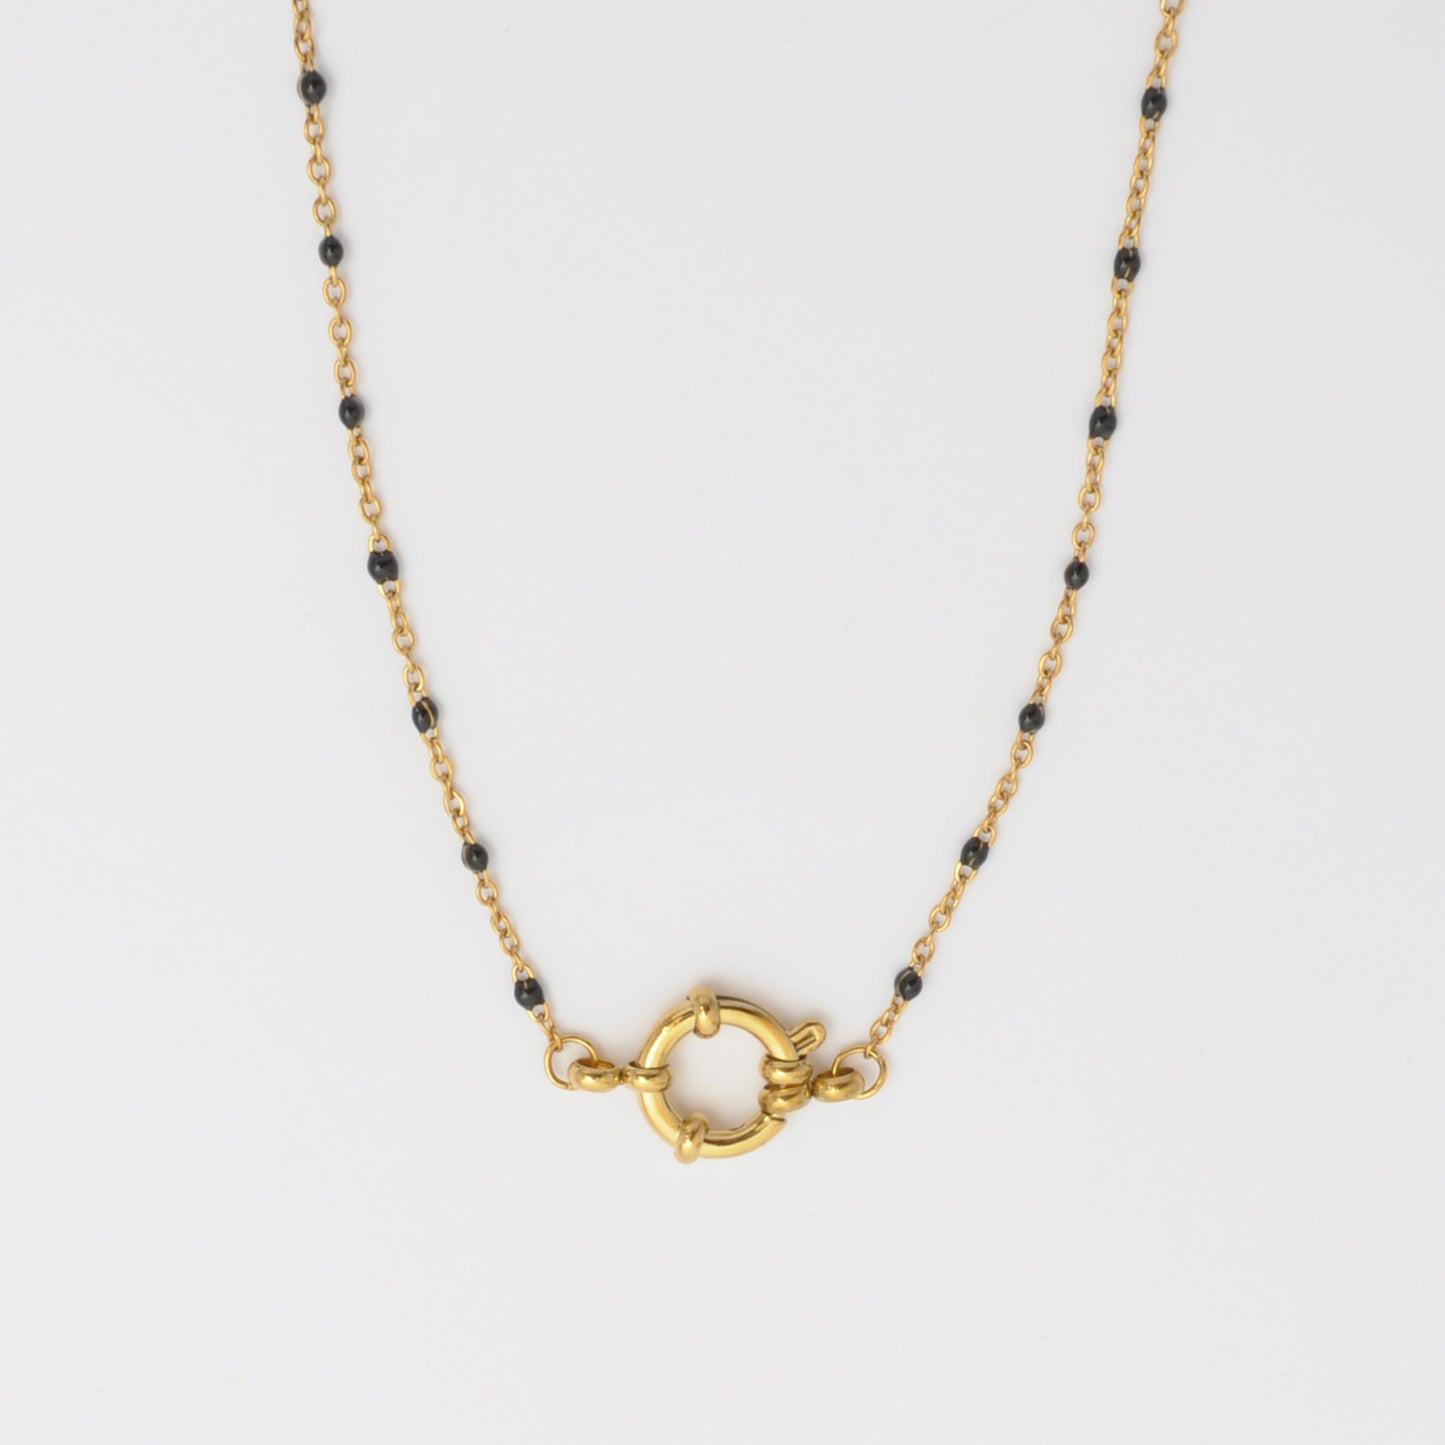 Dainty Necklace Black and Gold Beaded Chain